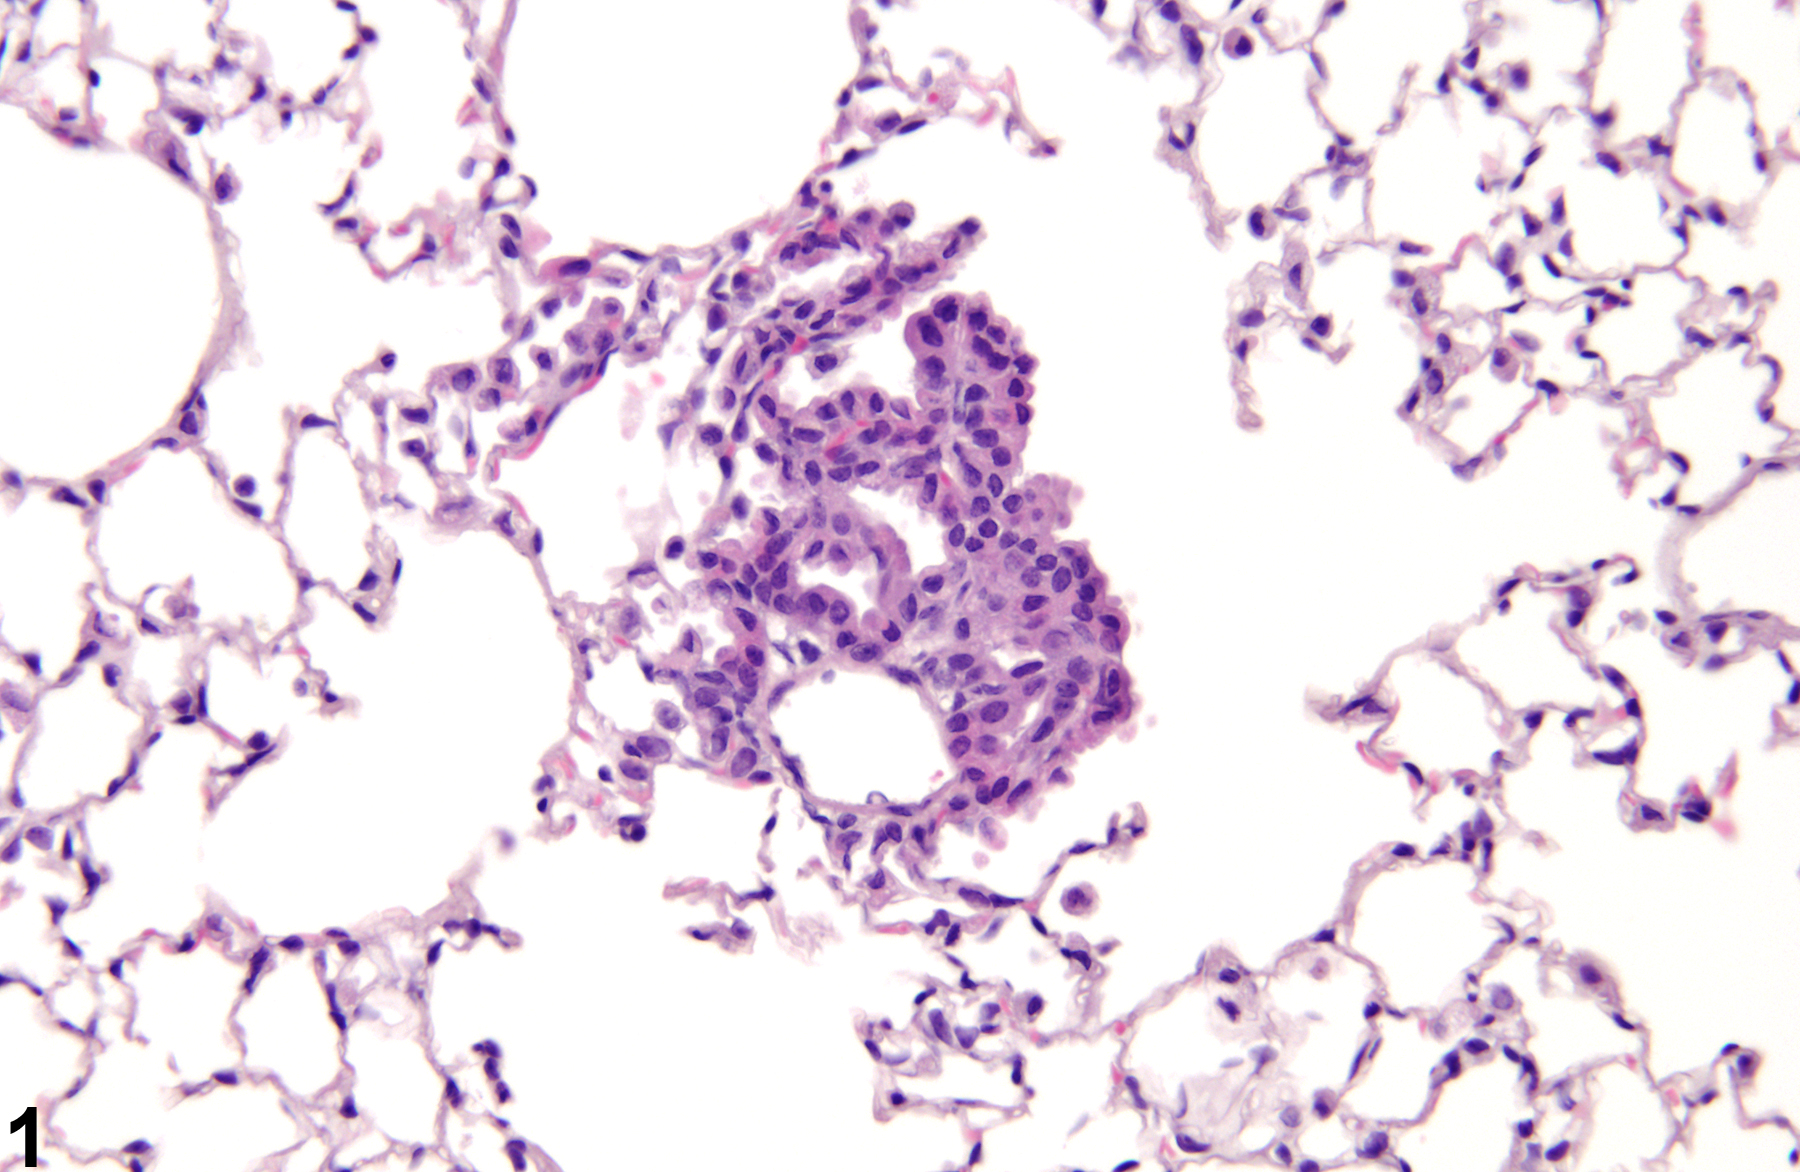 Image of alveolar epithelial hyperplasia in the lung from a male B6C3F1/N mouse in a chronic study